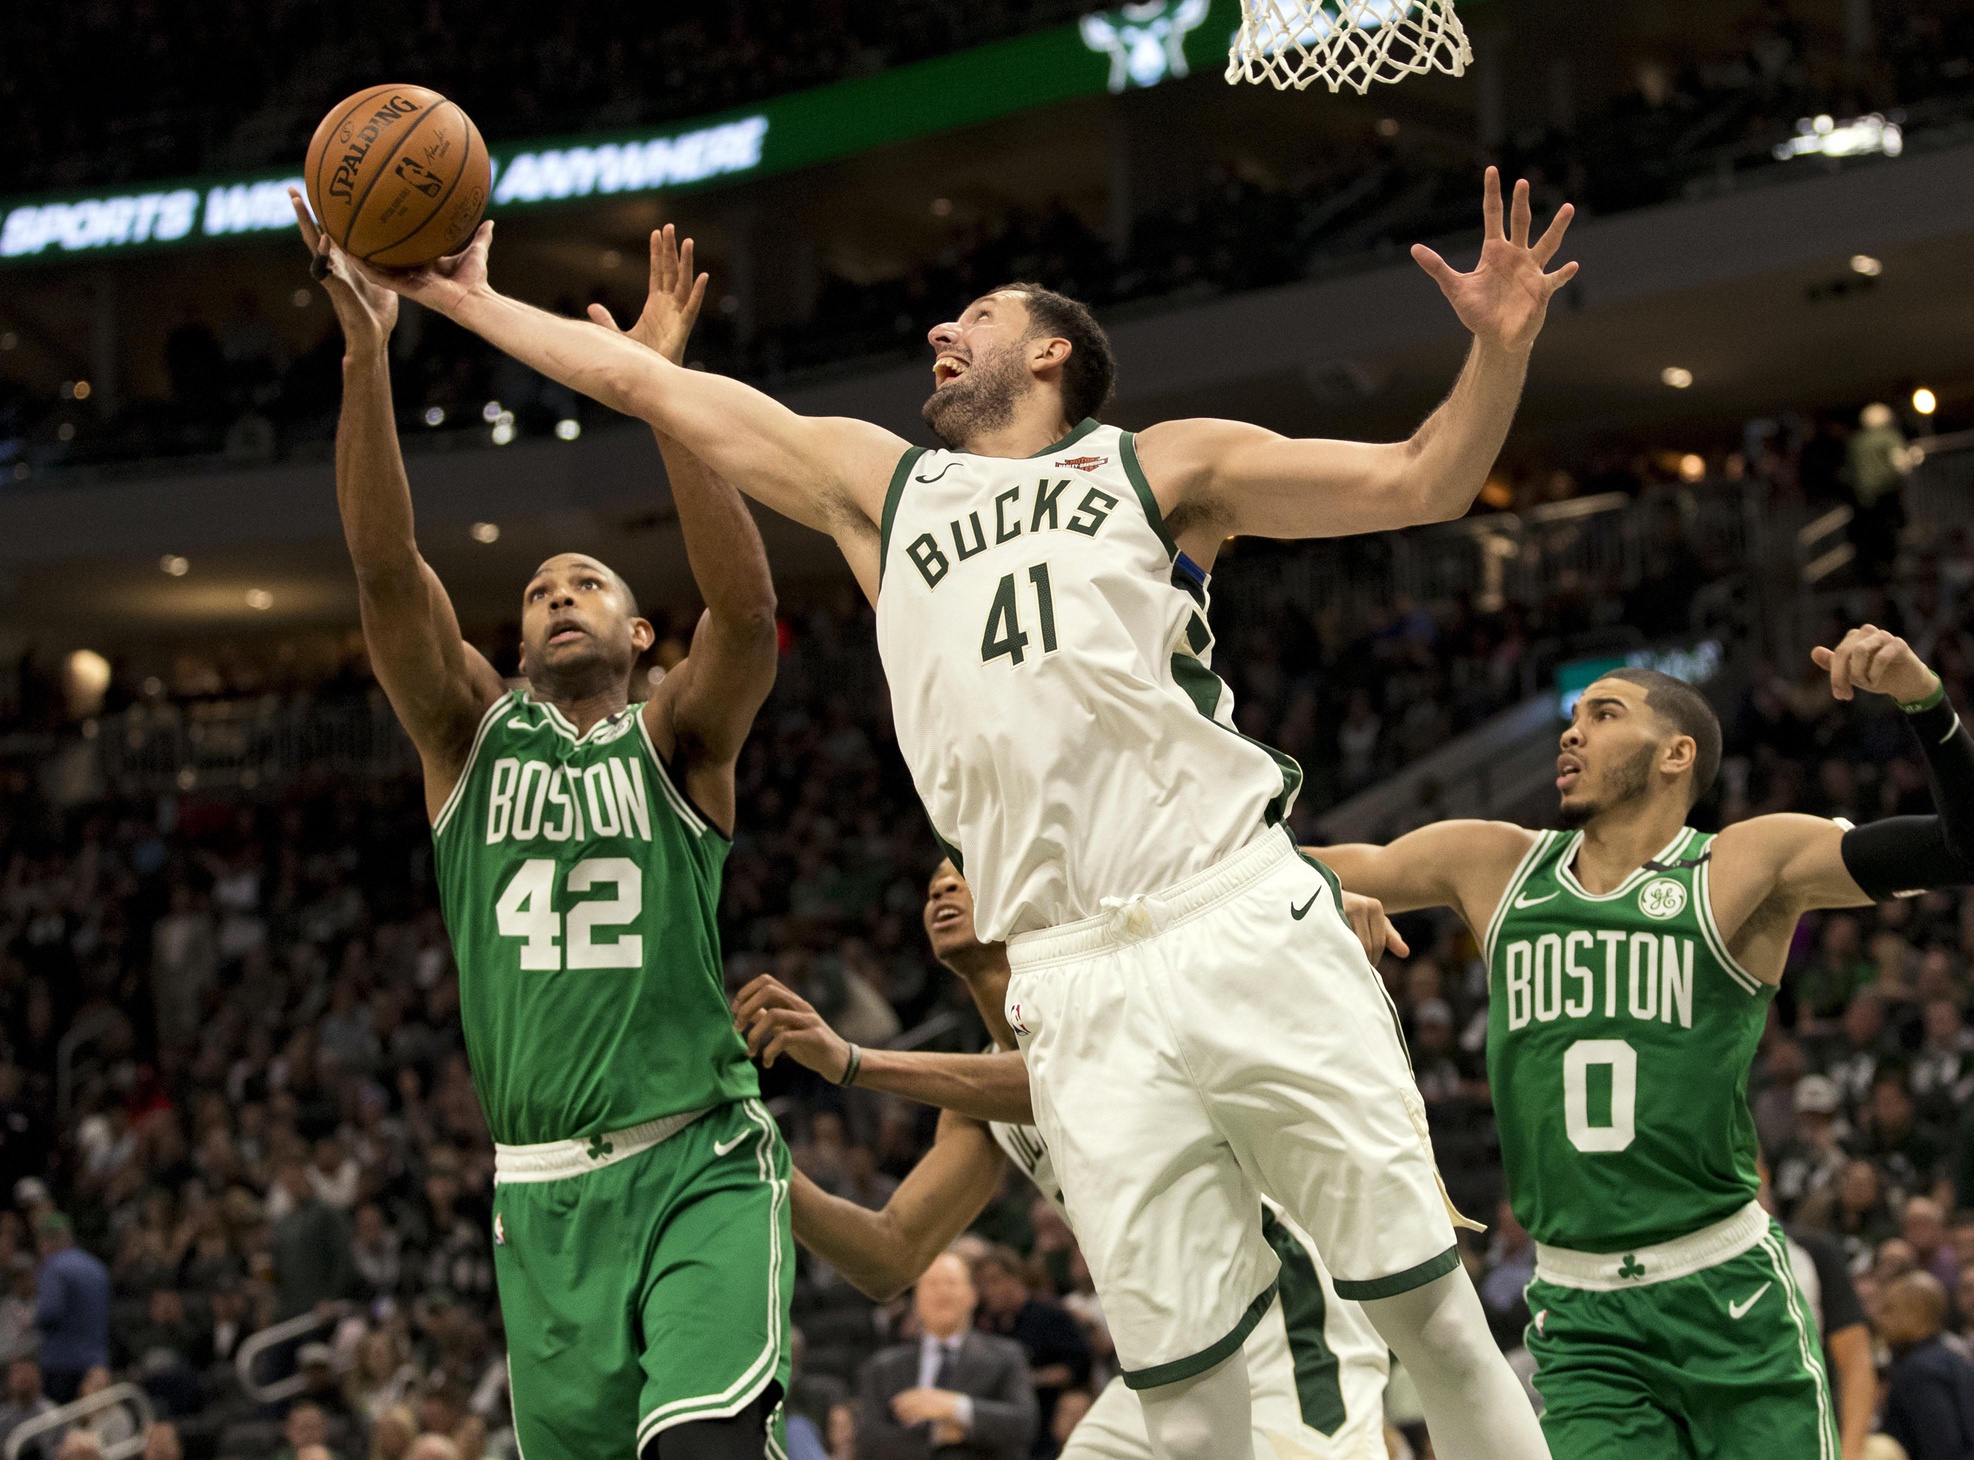 May 8, 2019; Milwaukee, WI, USA; Milwaukee Bucks forward Nikola Mirotic (41) reaches for a rebound over Boston Celtics center Al Horford (42) during the third quarter in game five of the second round of the 2019 NBA Playoffs at Fiserv Forum. Mandatory Credit: Jeff Hanisch-USA TODAY Sports (NBA News)